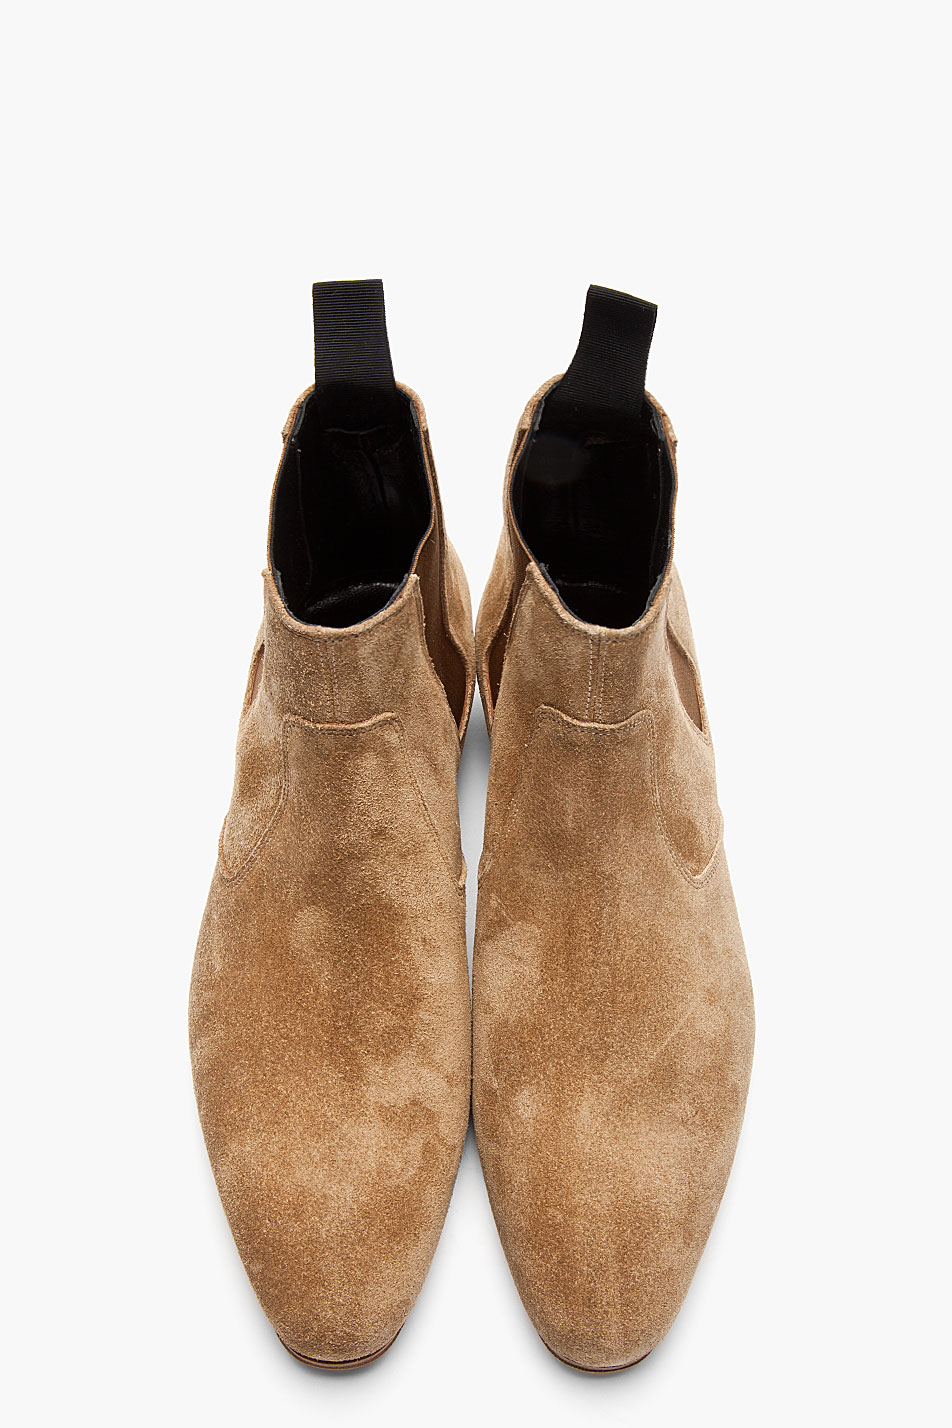 Lyst - Saint Laurent Tan Distressed Suede Chelsea Billy Boots in Brown ...